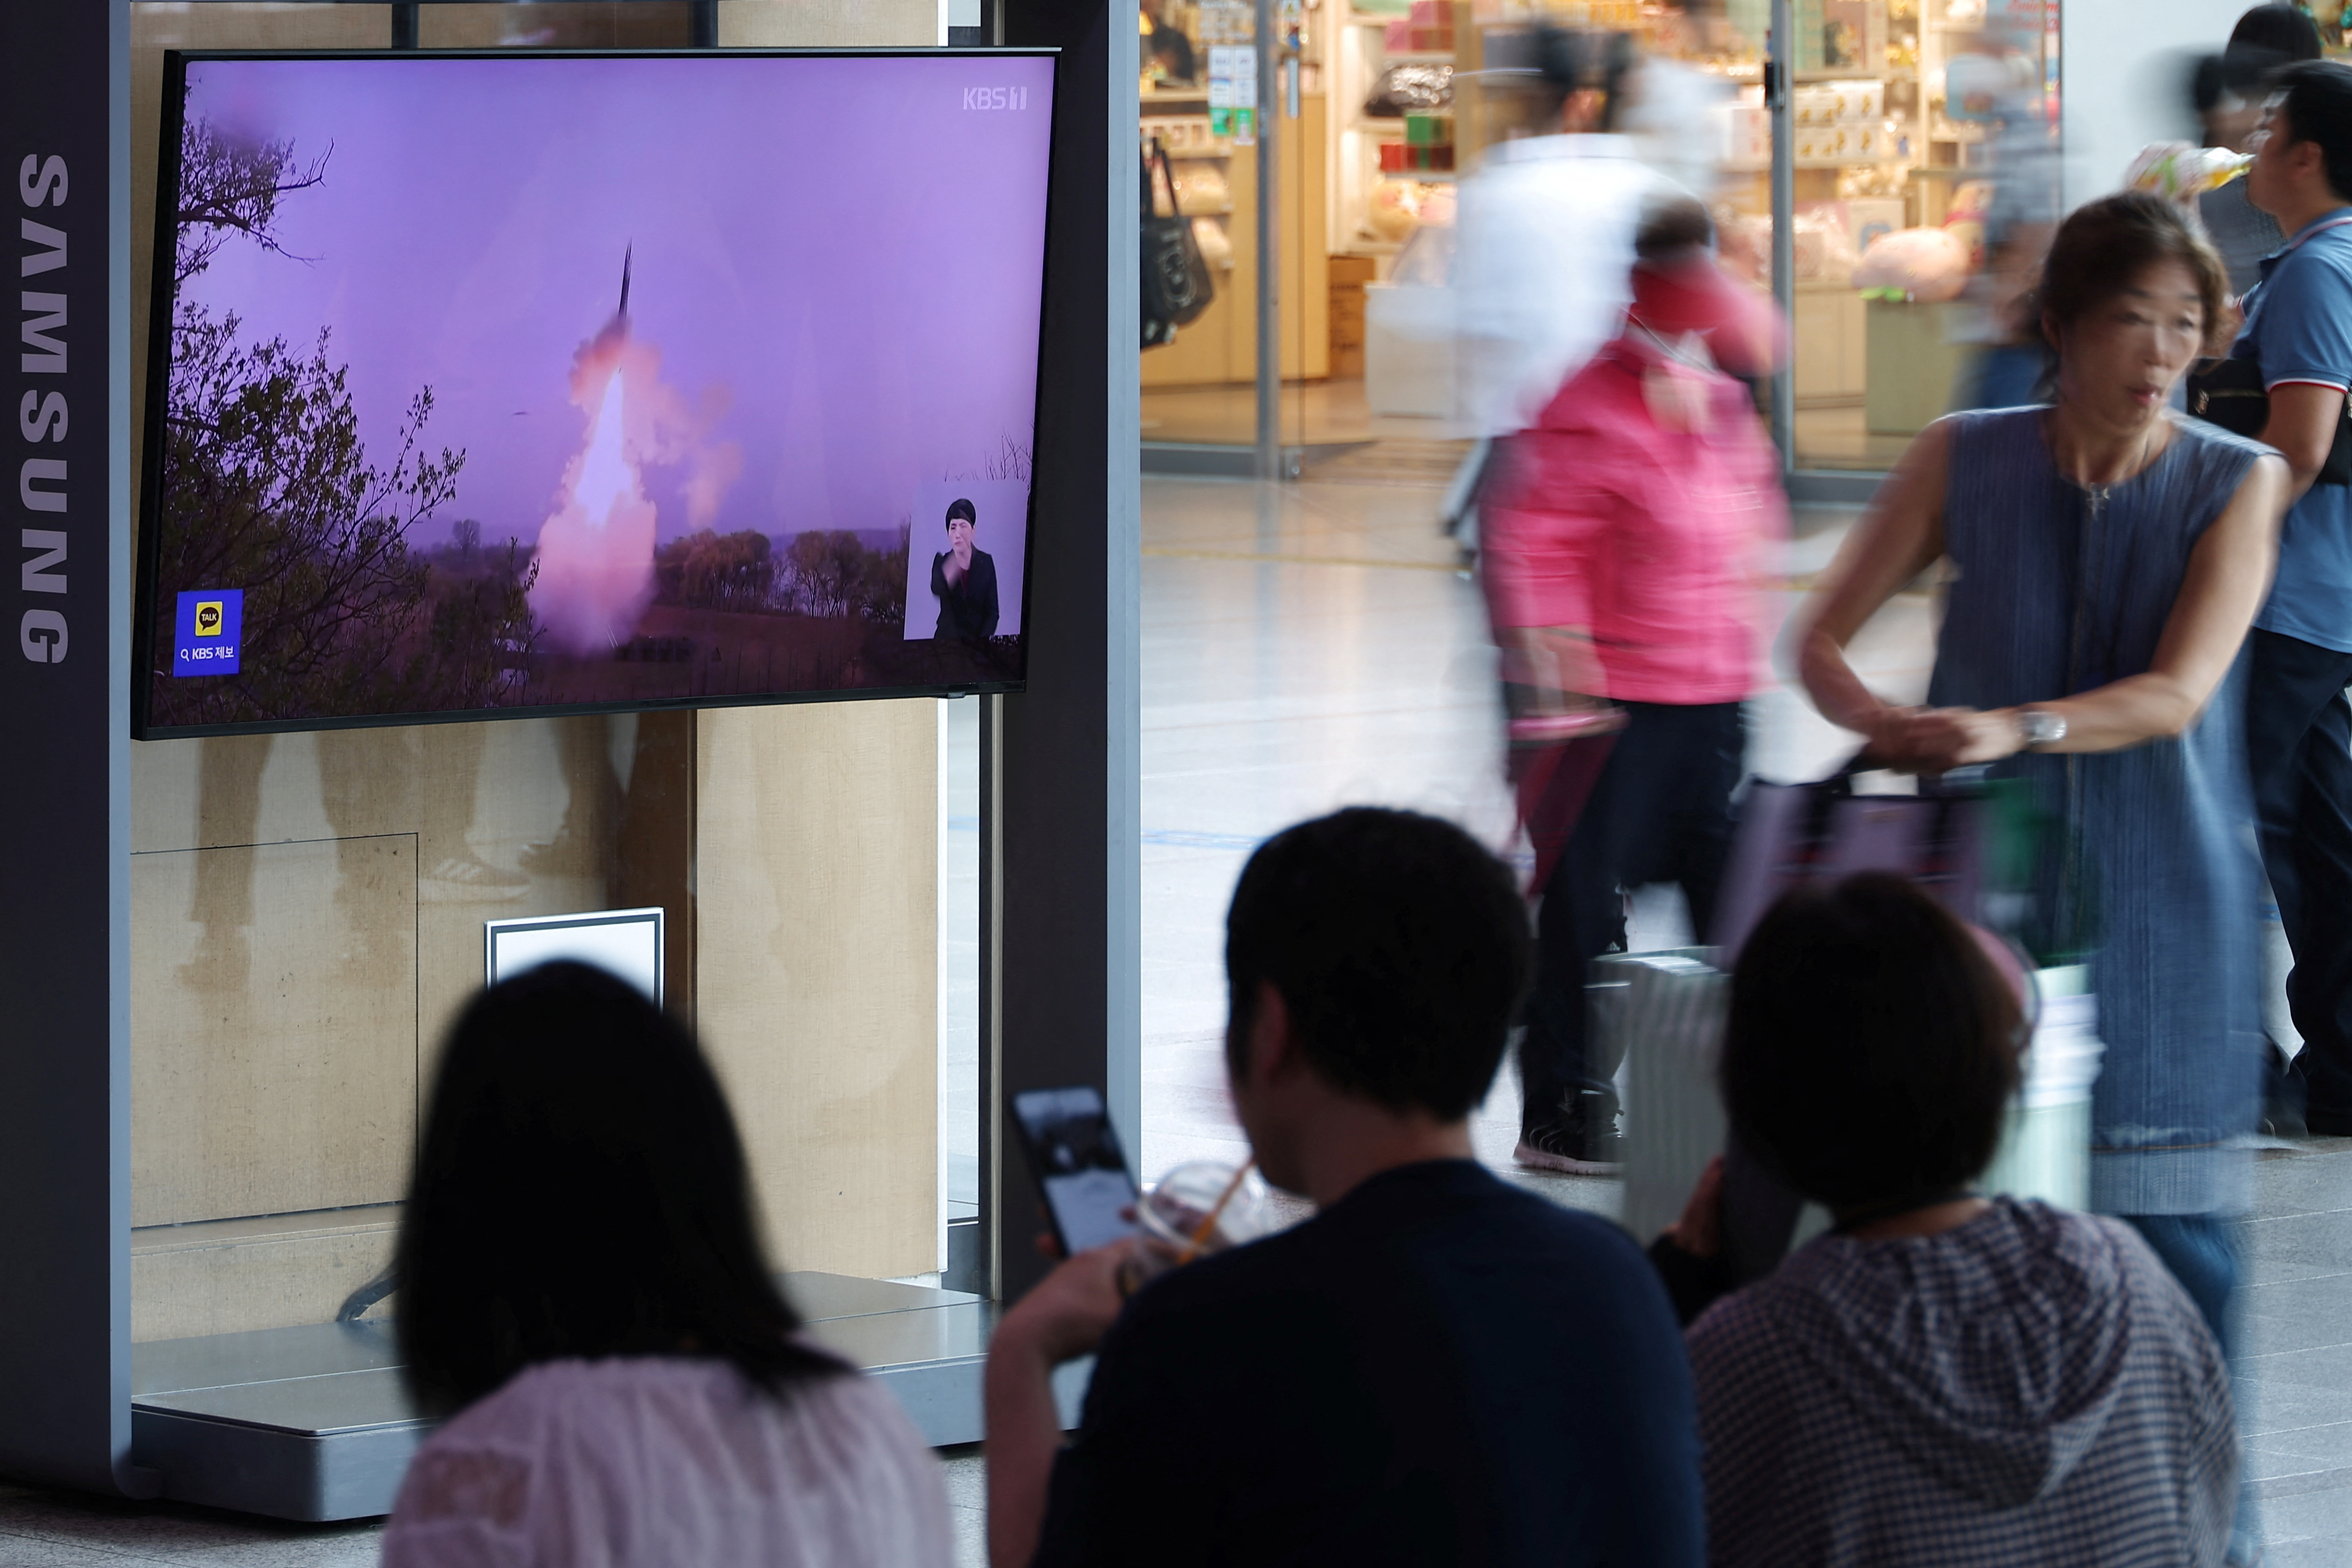 Passengers wait for their train in front of a TV broadcasting a news report on North Korea firing a ballistic missile off its east coast, at a railway station in Seoul